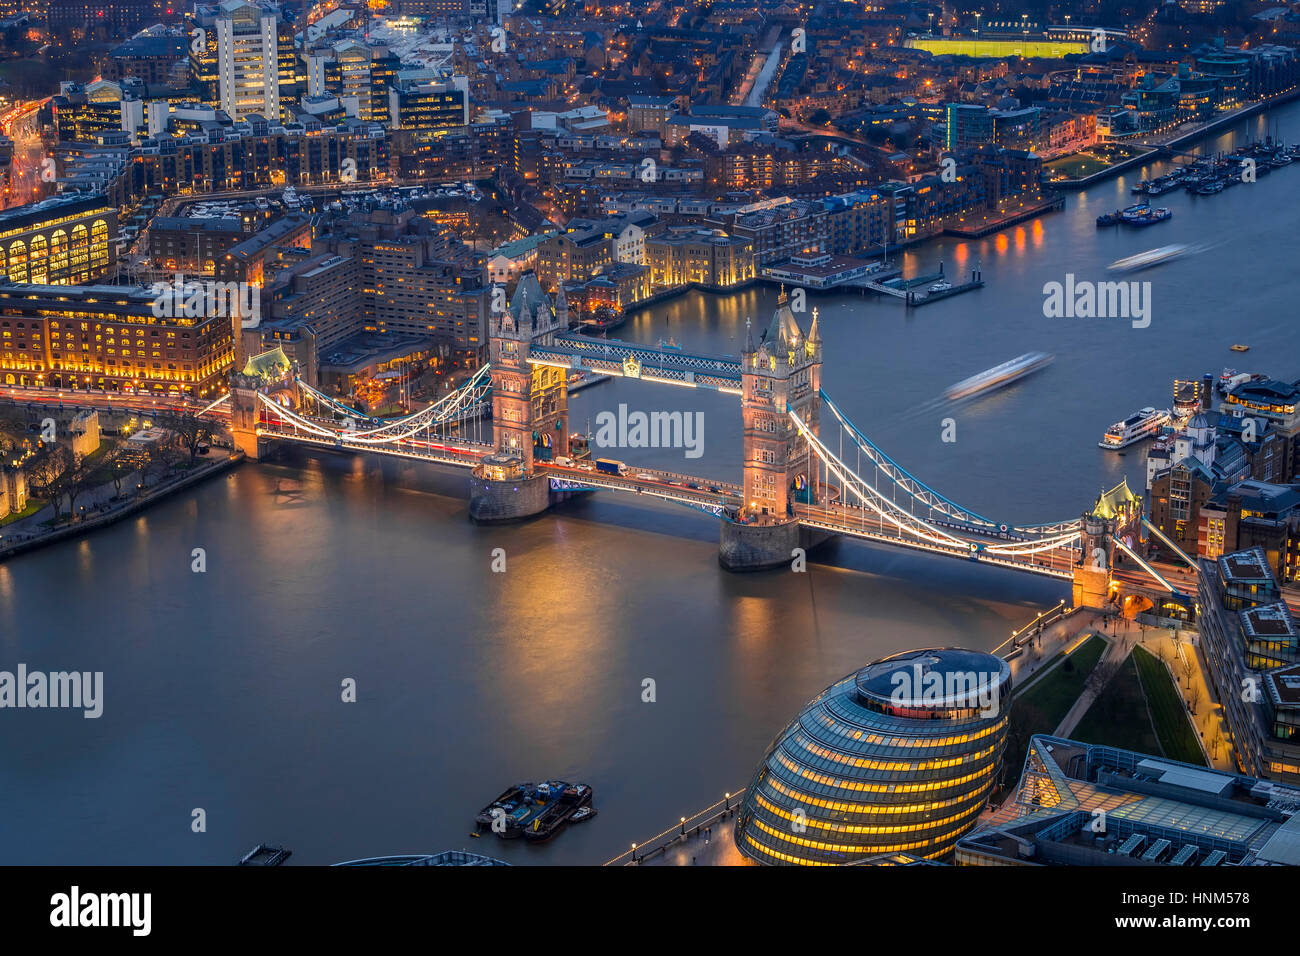 London, England - Aerial view of the world famous Tower Bridge, City Hall and the Tower of London by night Stock Photo